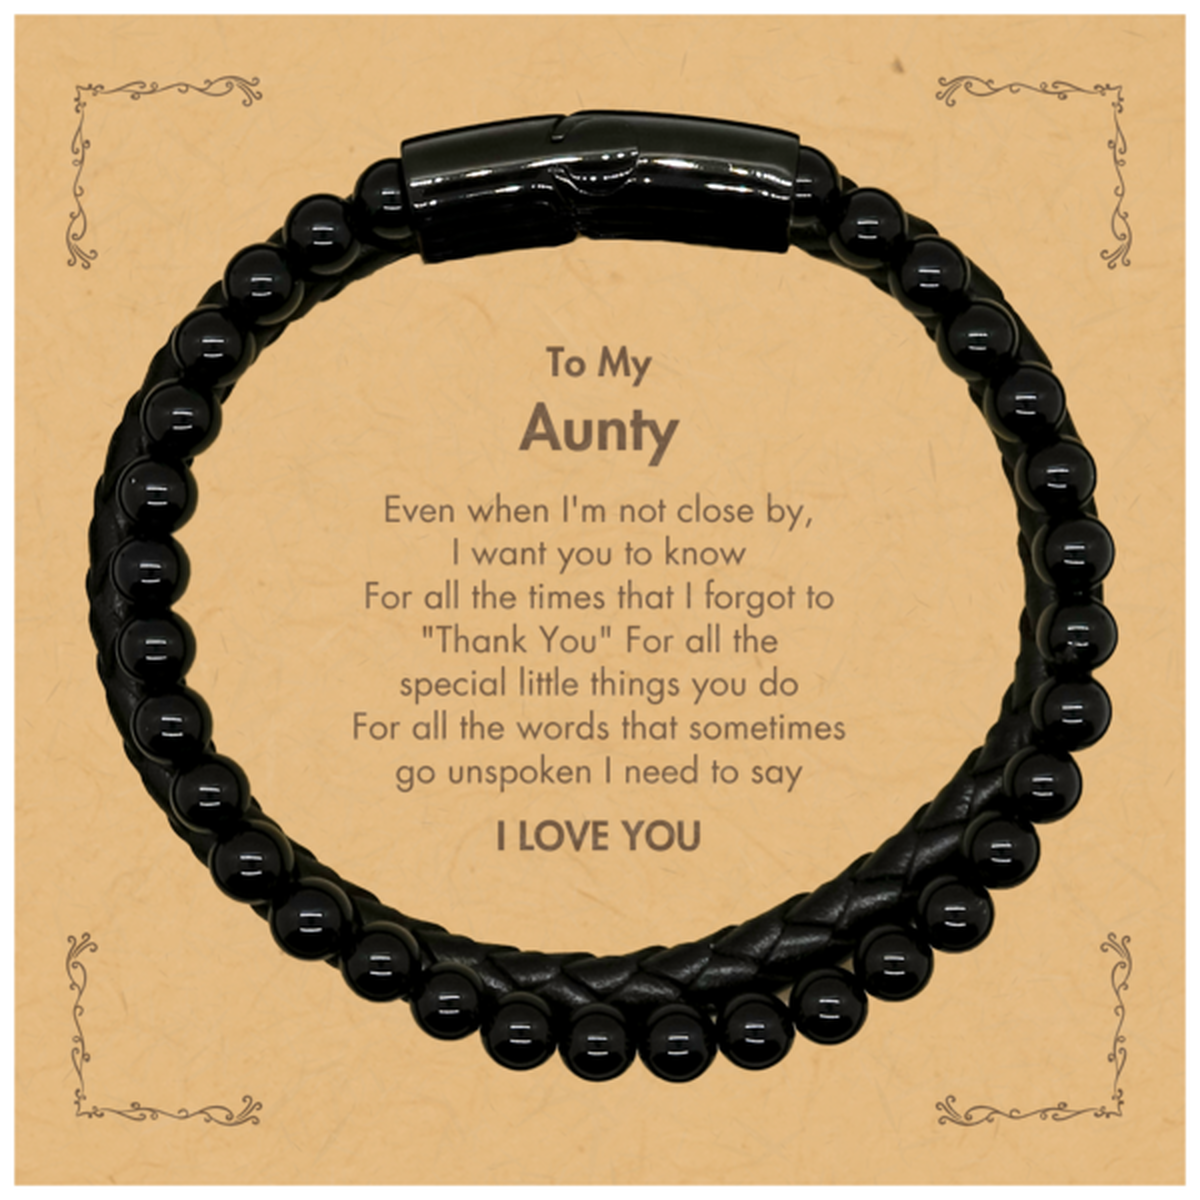 Thank You Gifts for Aunty, Keepsake Stone Leather Bracelets Gifts for Aunty Birthday Mother's day Father's Day Aunty For all the words That sometimes go unspoken I need to say I LOVE YOU